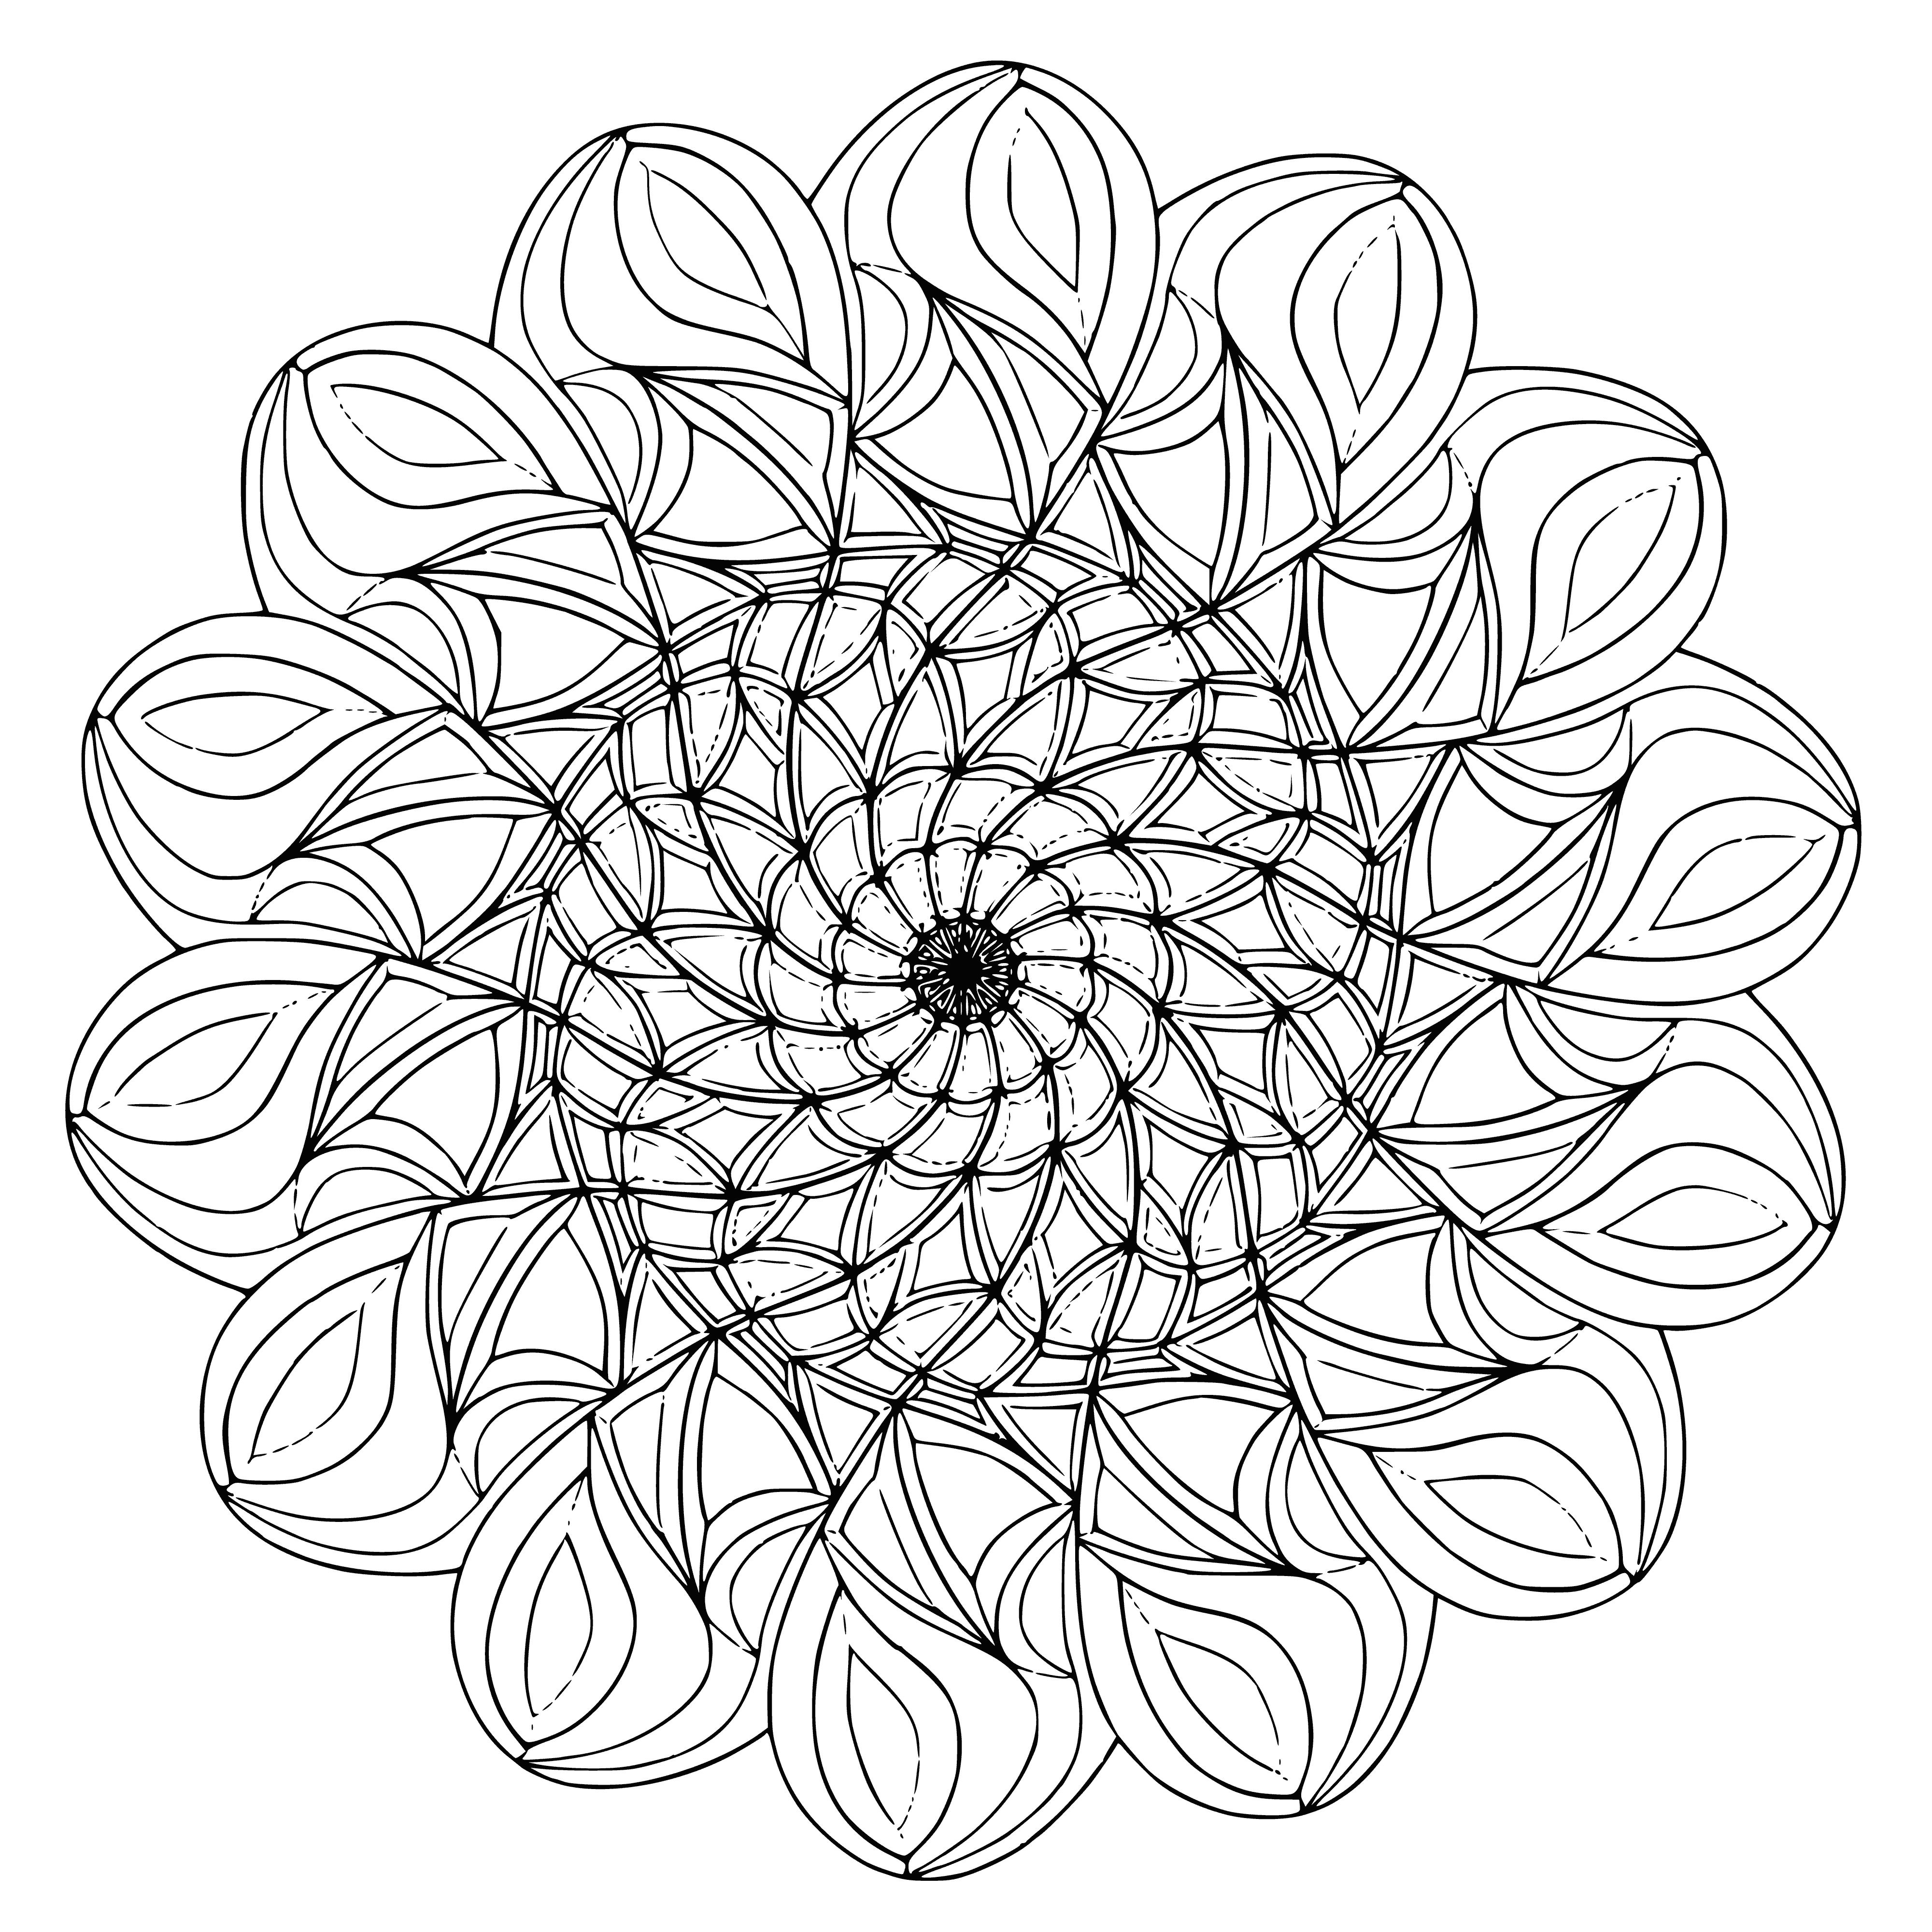 coloring page: Person concentrates on filling in a coloring book mandala with markers, creating a beautiful, symmetrical design.